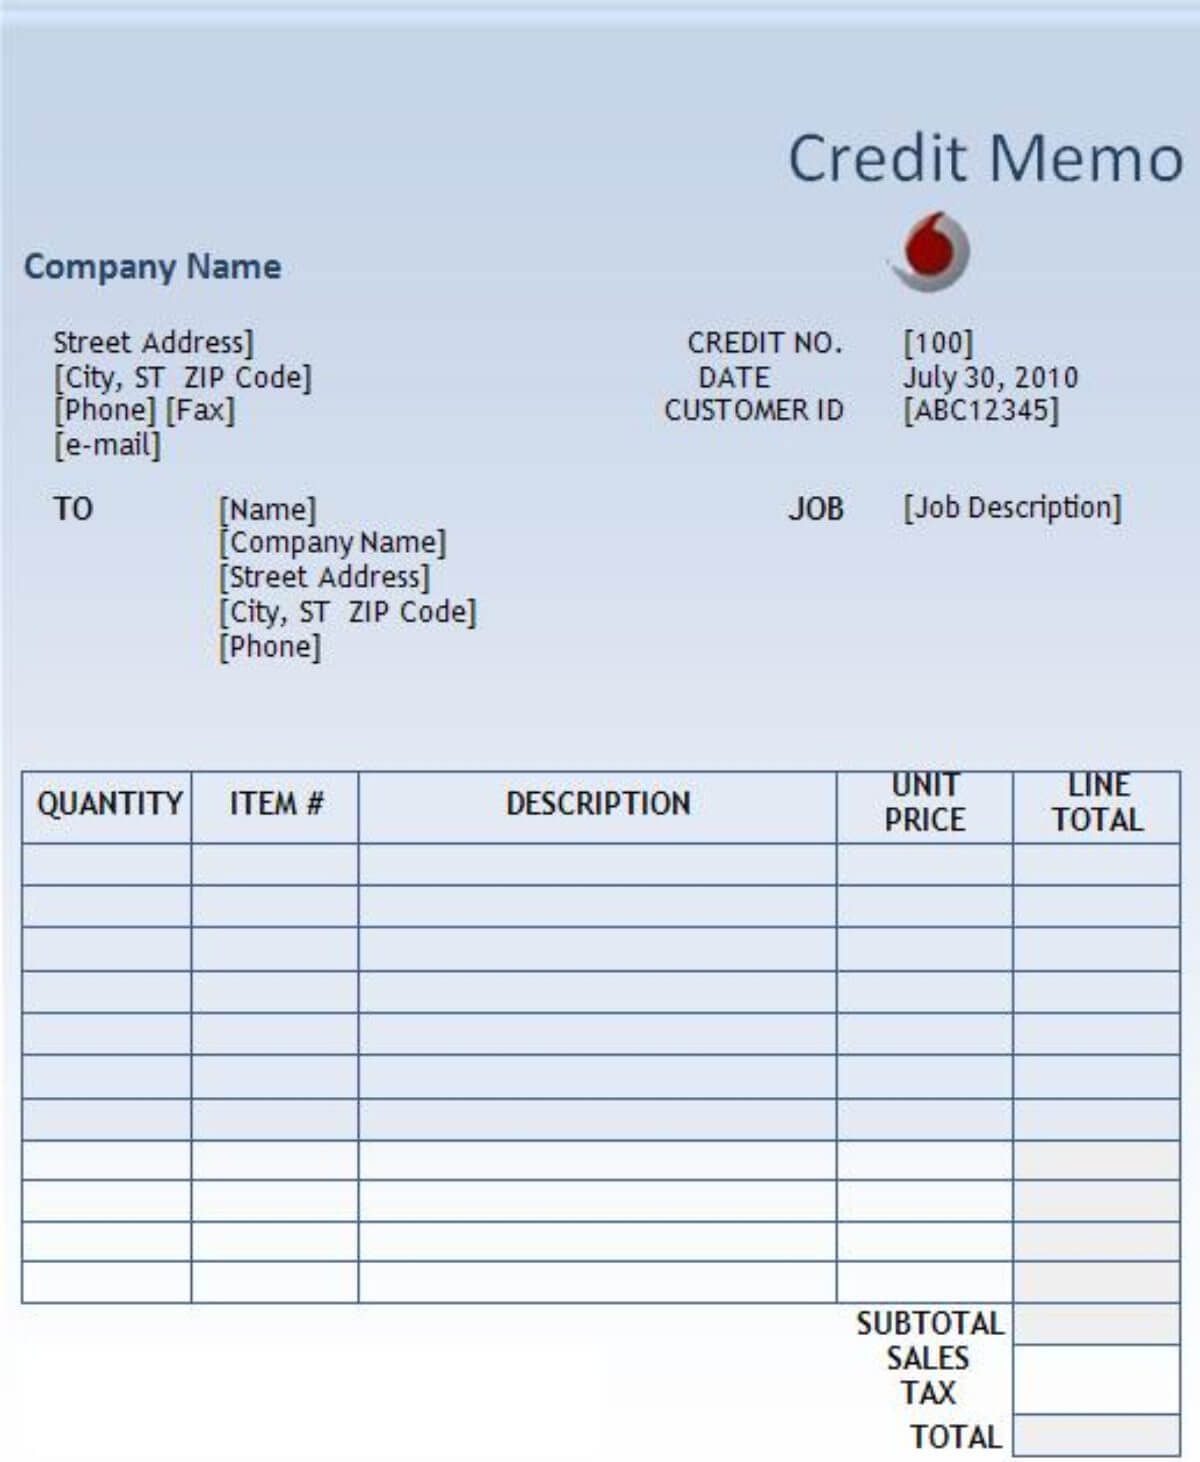 Credit Memo Template | Free Printable Ms Word Format Within Memo Template Word 2010